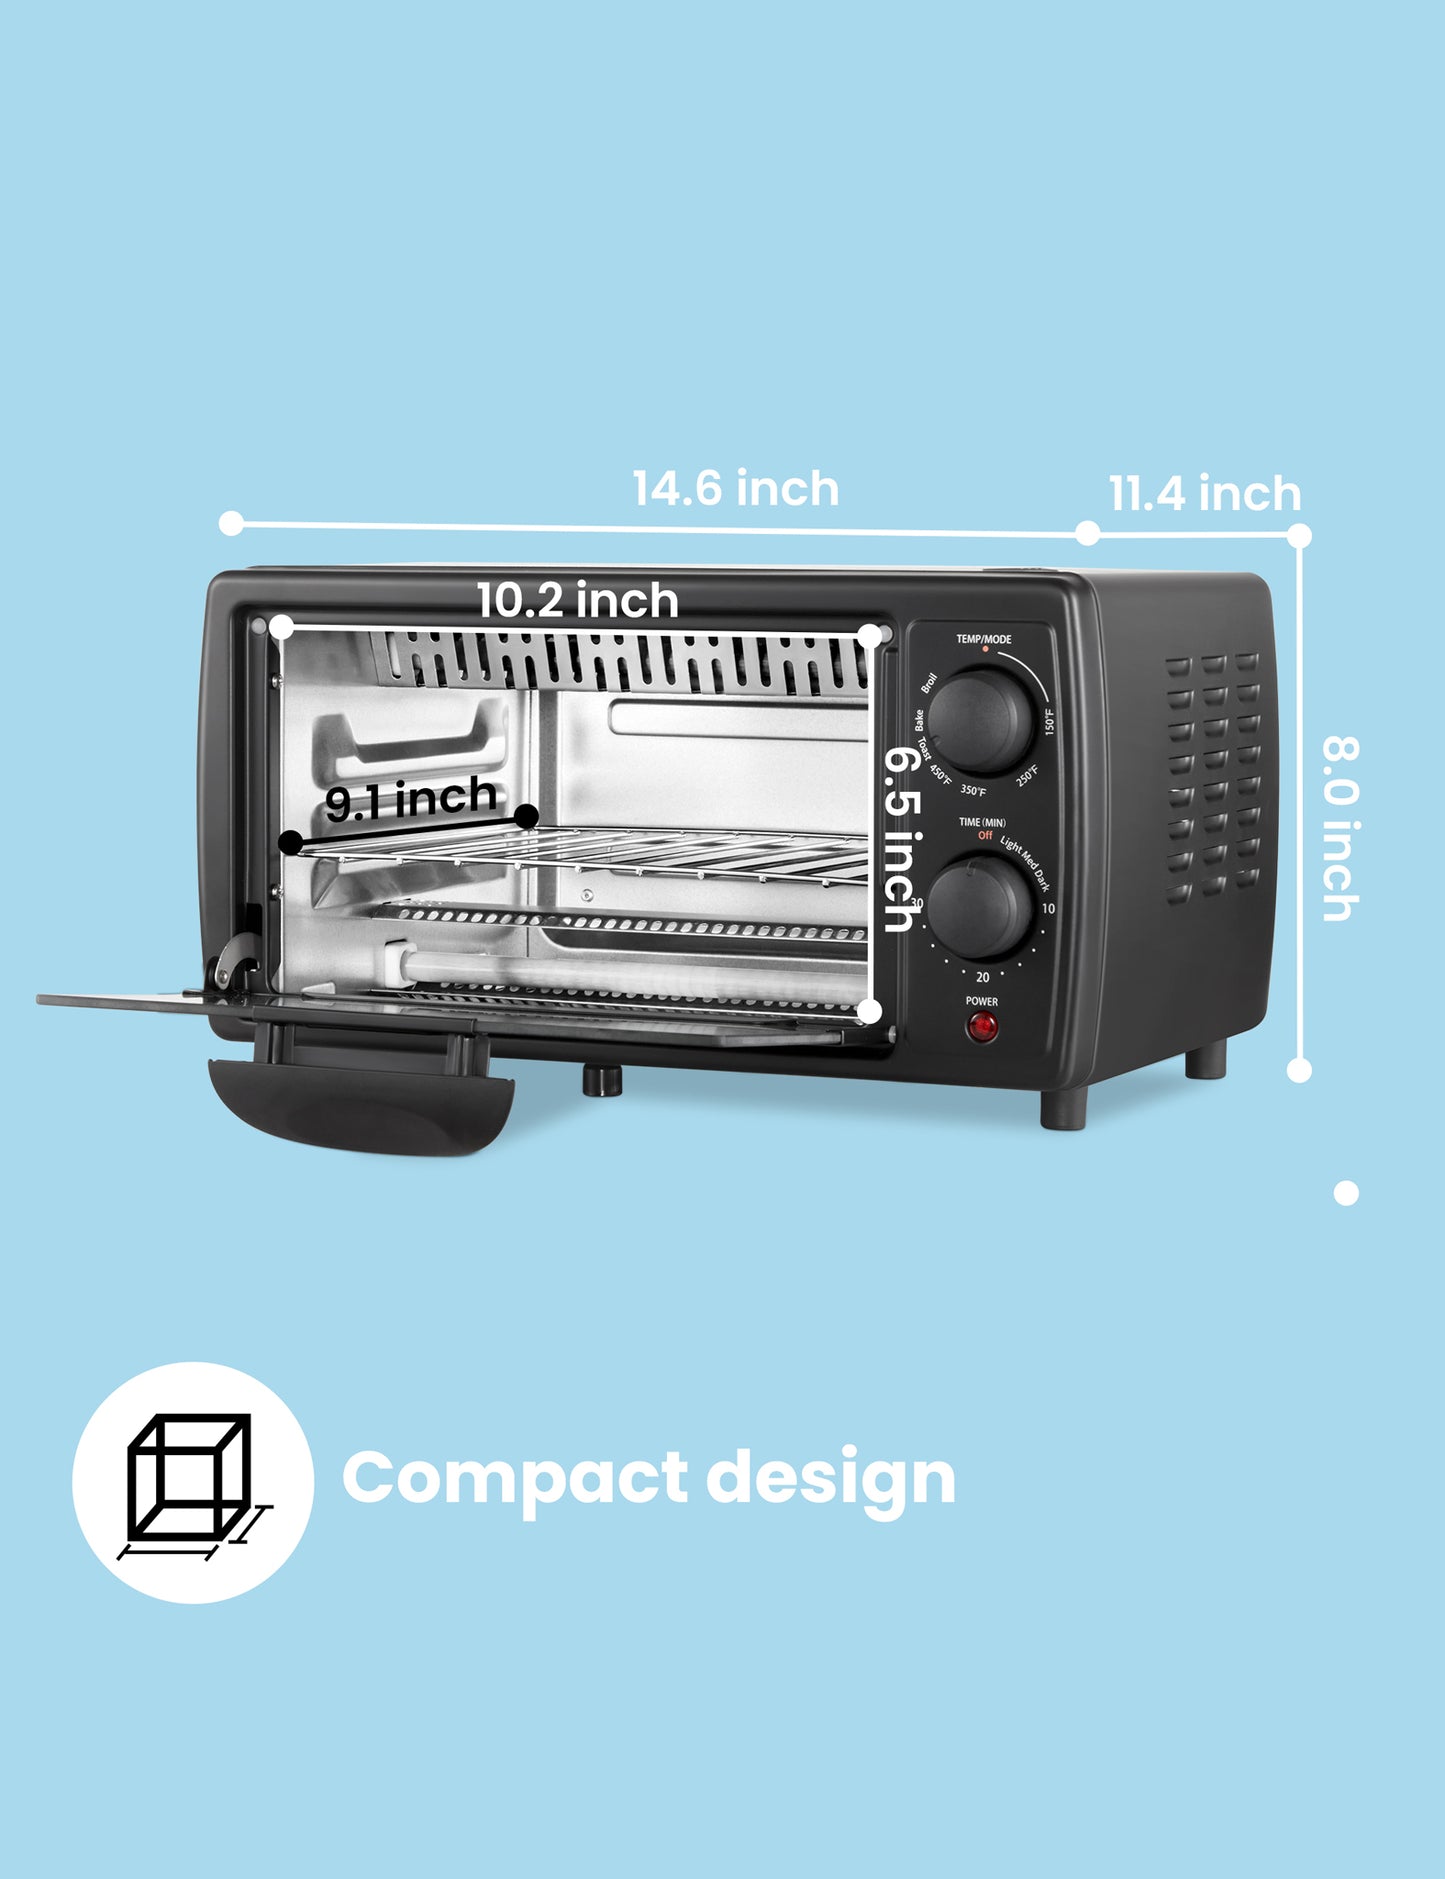 dimension of black comfee toaster oven